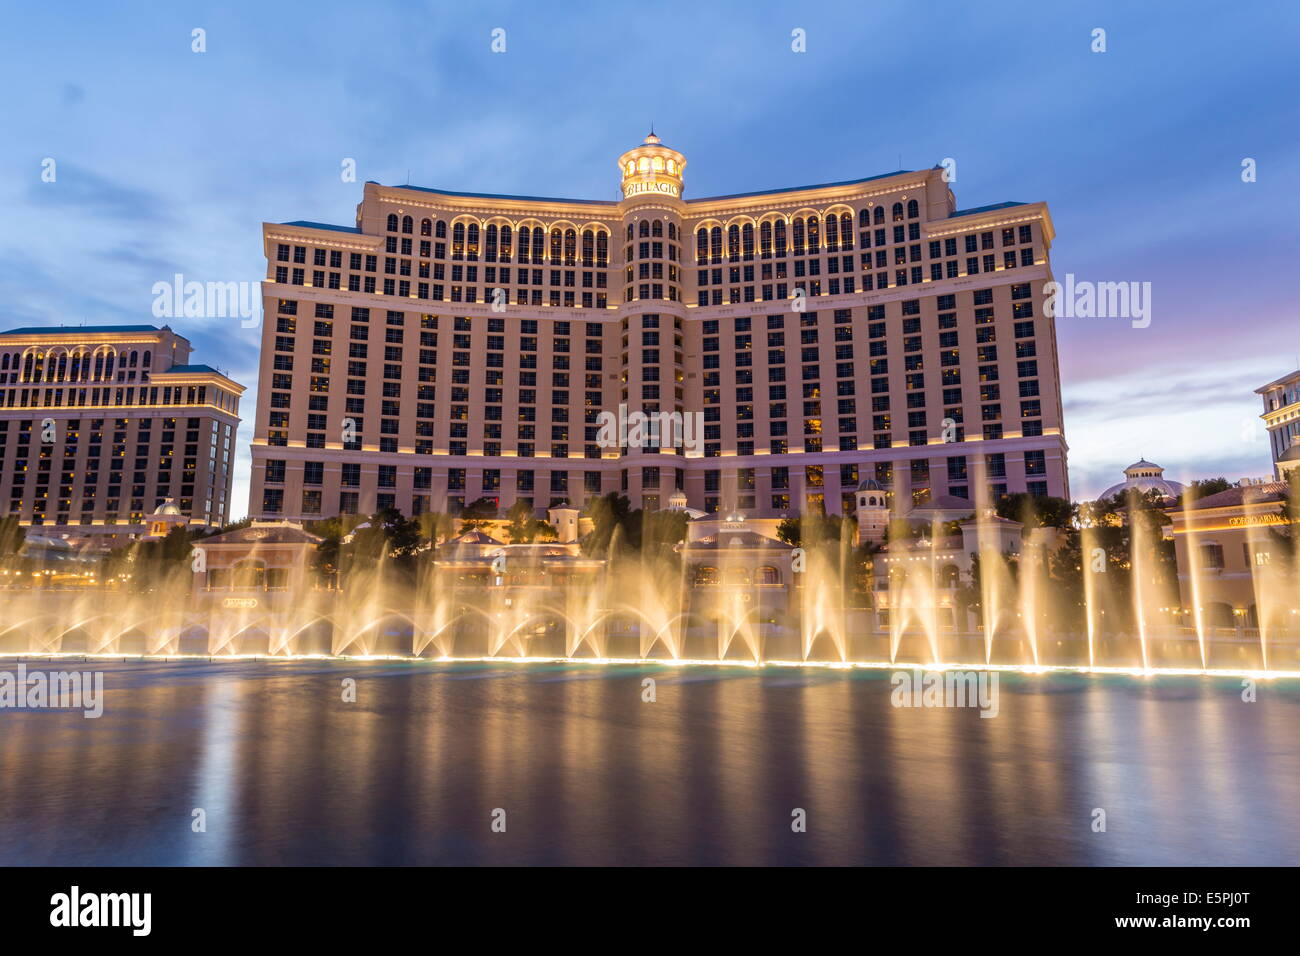 Bellagio at dusk with fountains, The Strip, Las Vegas, Nevada, United States of America, North America Stock Photo